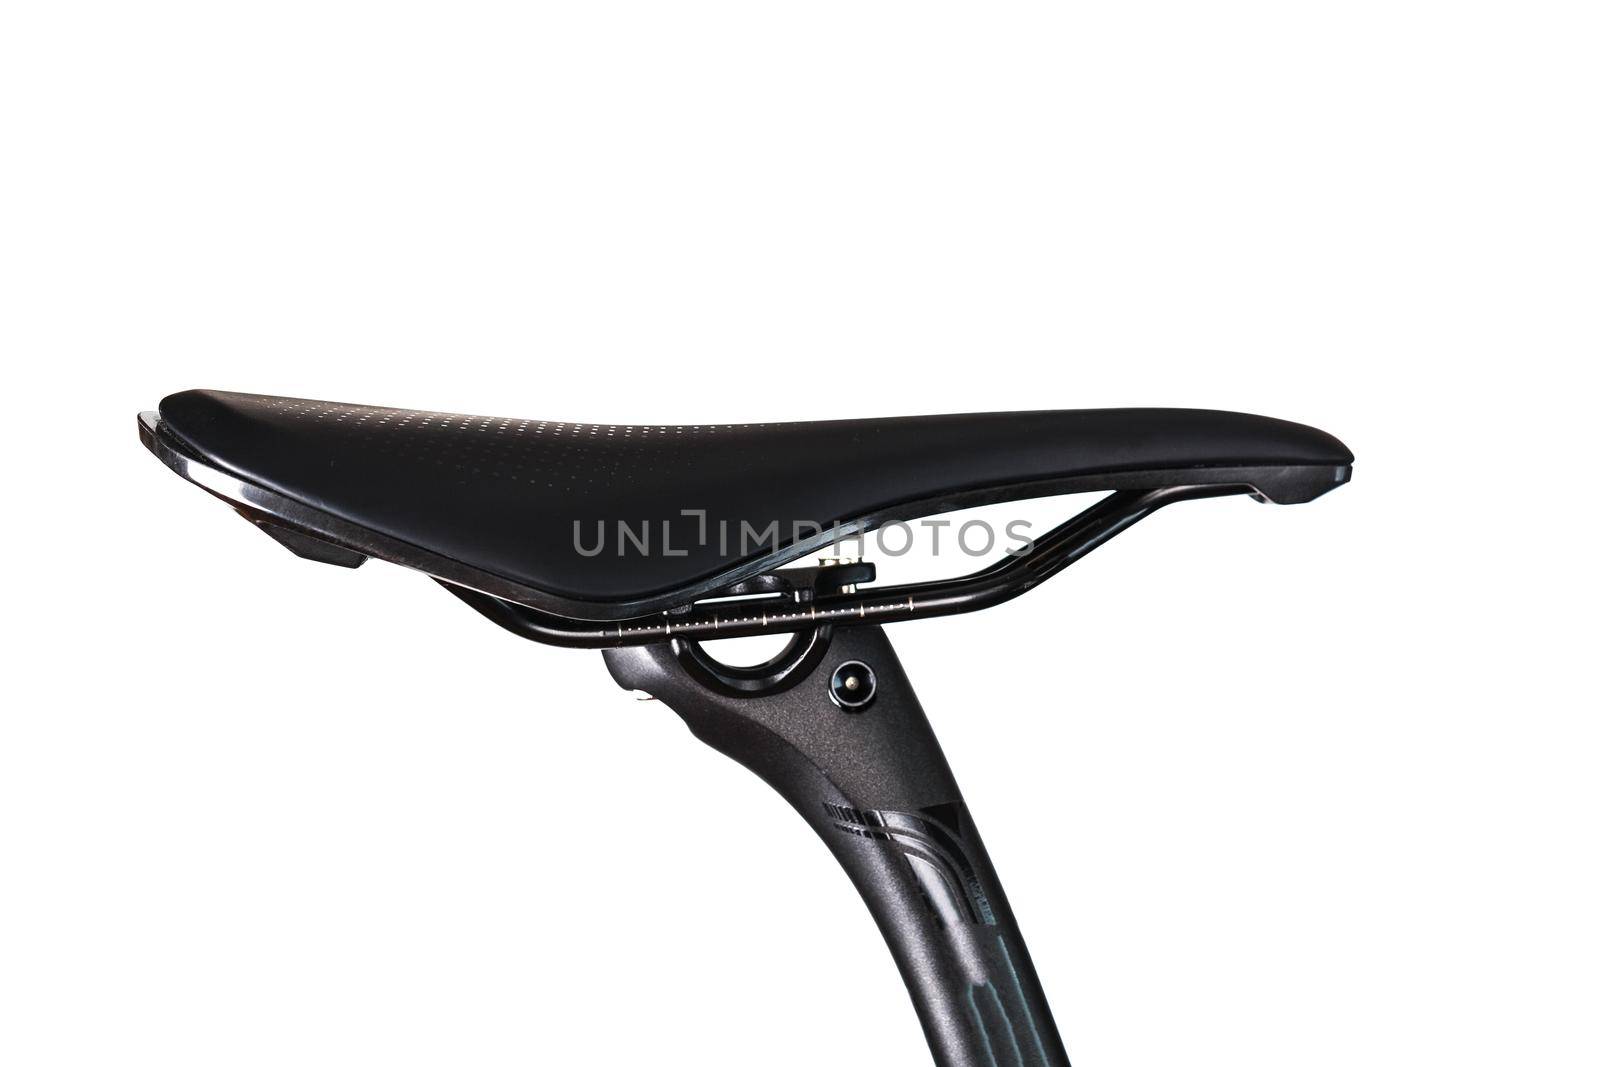 Bicycle saddle with seatpost on a light background accessories for bike repair and tuning by AlexGrec